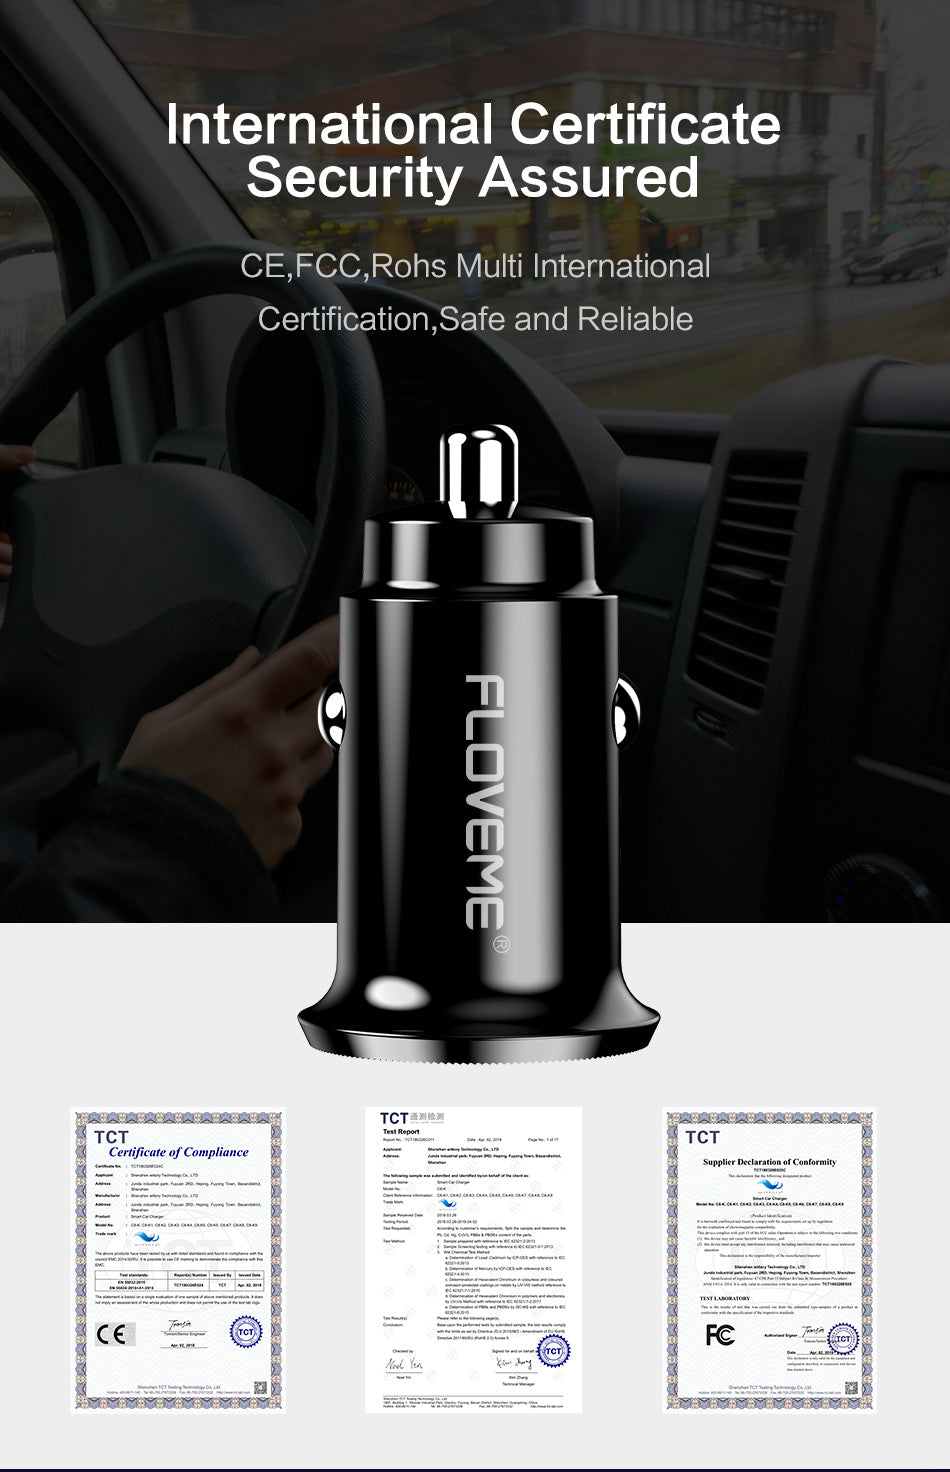 FLOVEME Mini USB Car Charger For iPhone X 8 7 6 Plus 3.1A Fast Car Charger For Xiaomi Redmi Note 7 Dual USB Car Charger Adapter - FLOVEME